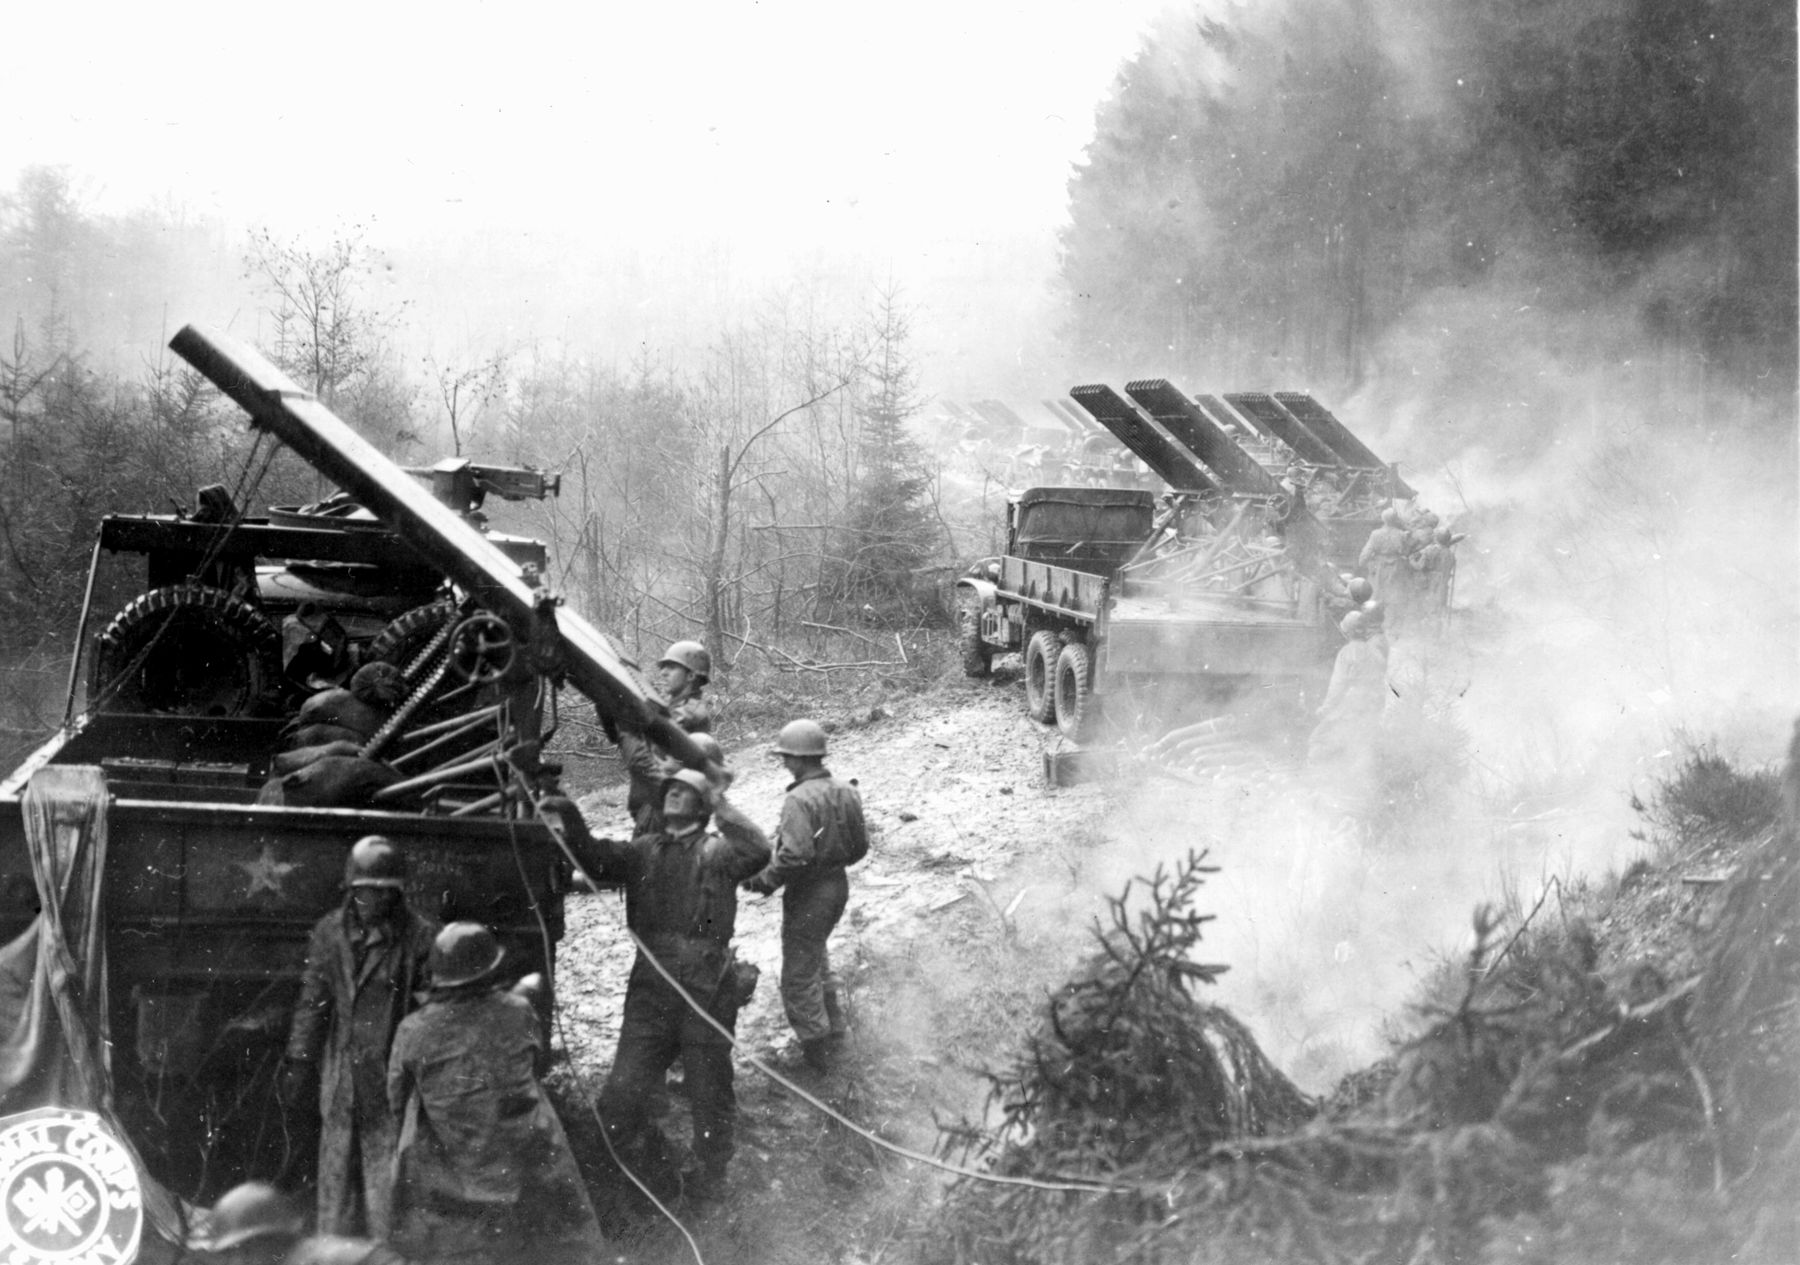 Men of the 18th Field Artillery Battalion, V Corps reload their rocket launchers in the Hürtgen Forest. Accurate and deadly American artillery fire was instrumental in 
holding the positions of the 2nd Ranger Battalion on Hill 400. 